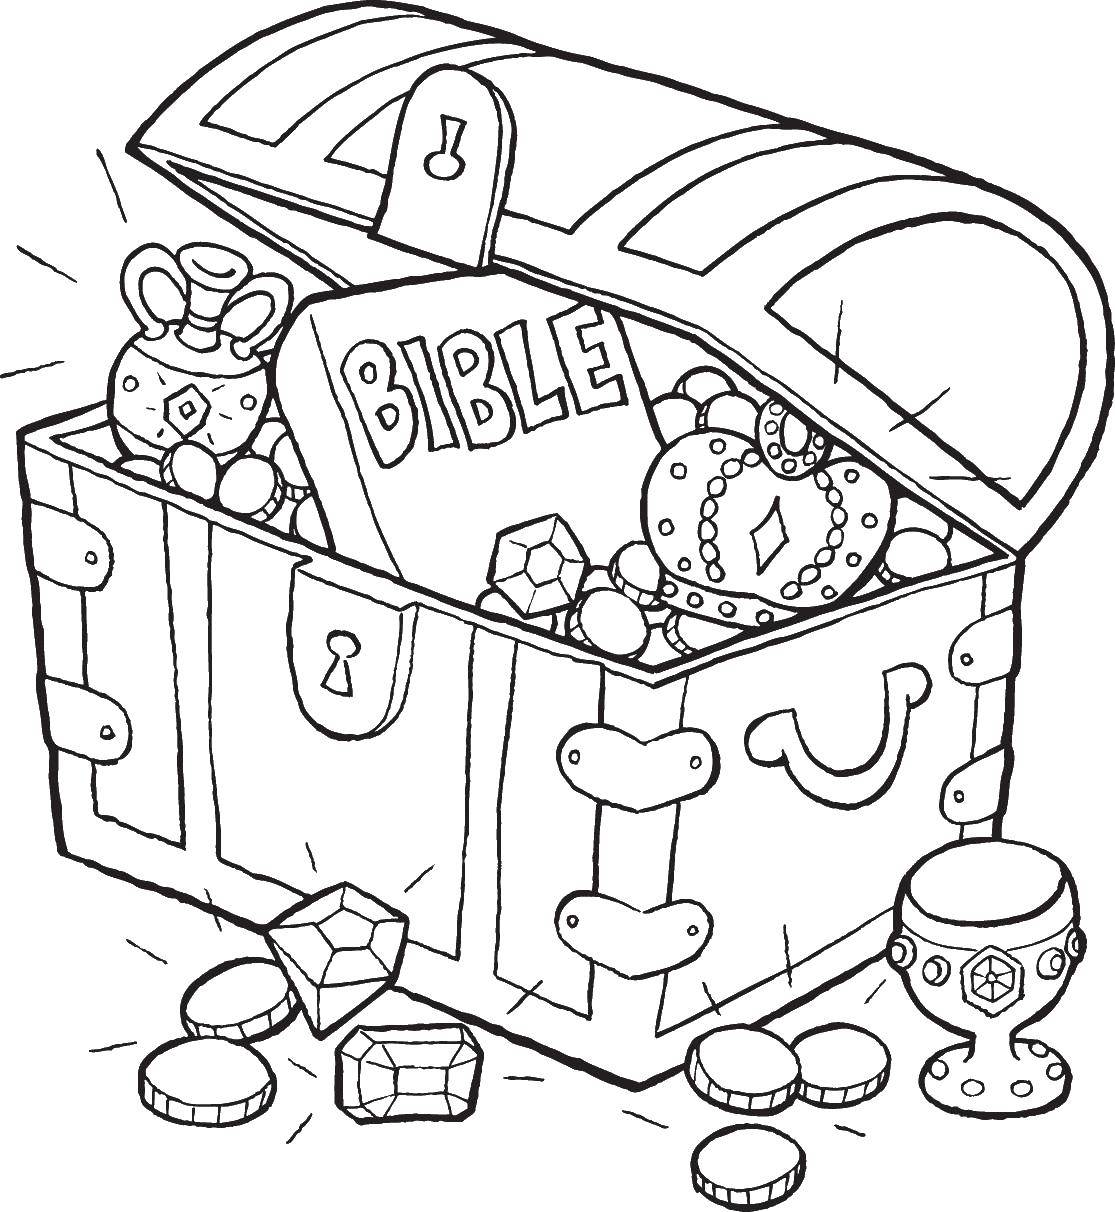 Coloring Chest sokrovischami and the Bible. Category treasure chest. Tags:  treasure chest, pirates, Bible.